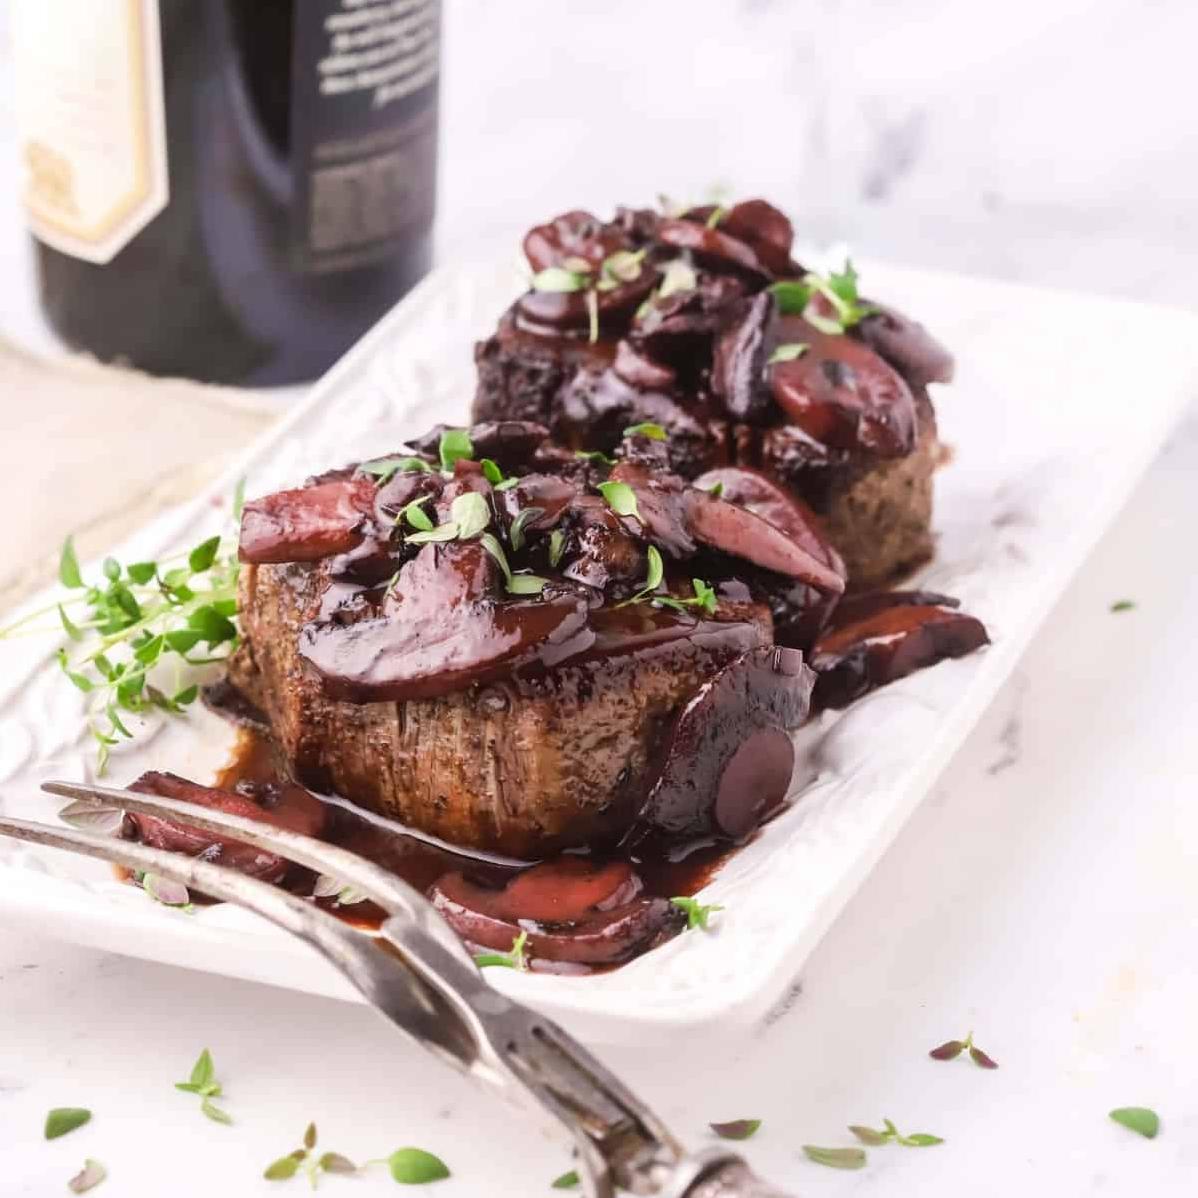  Drizzle this rich and flavorful red wine sauce on top of the perfectly cooked filet mignon for a restaurant-quality dish at home.